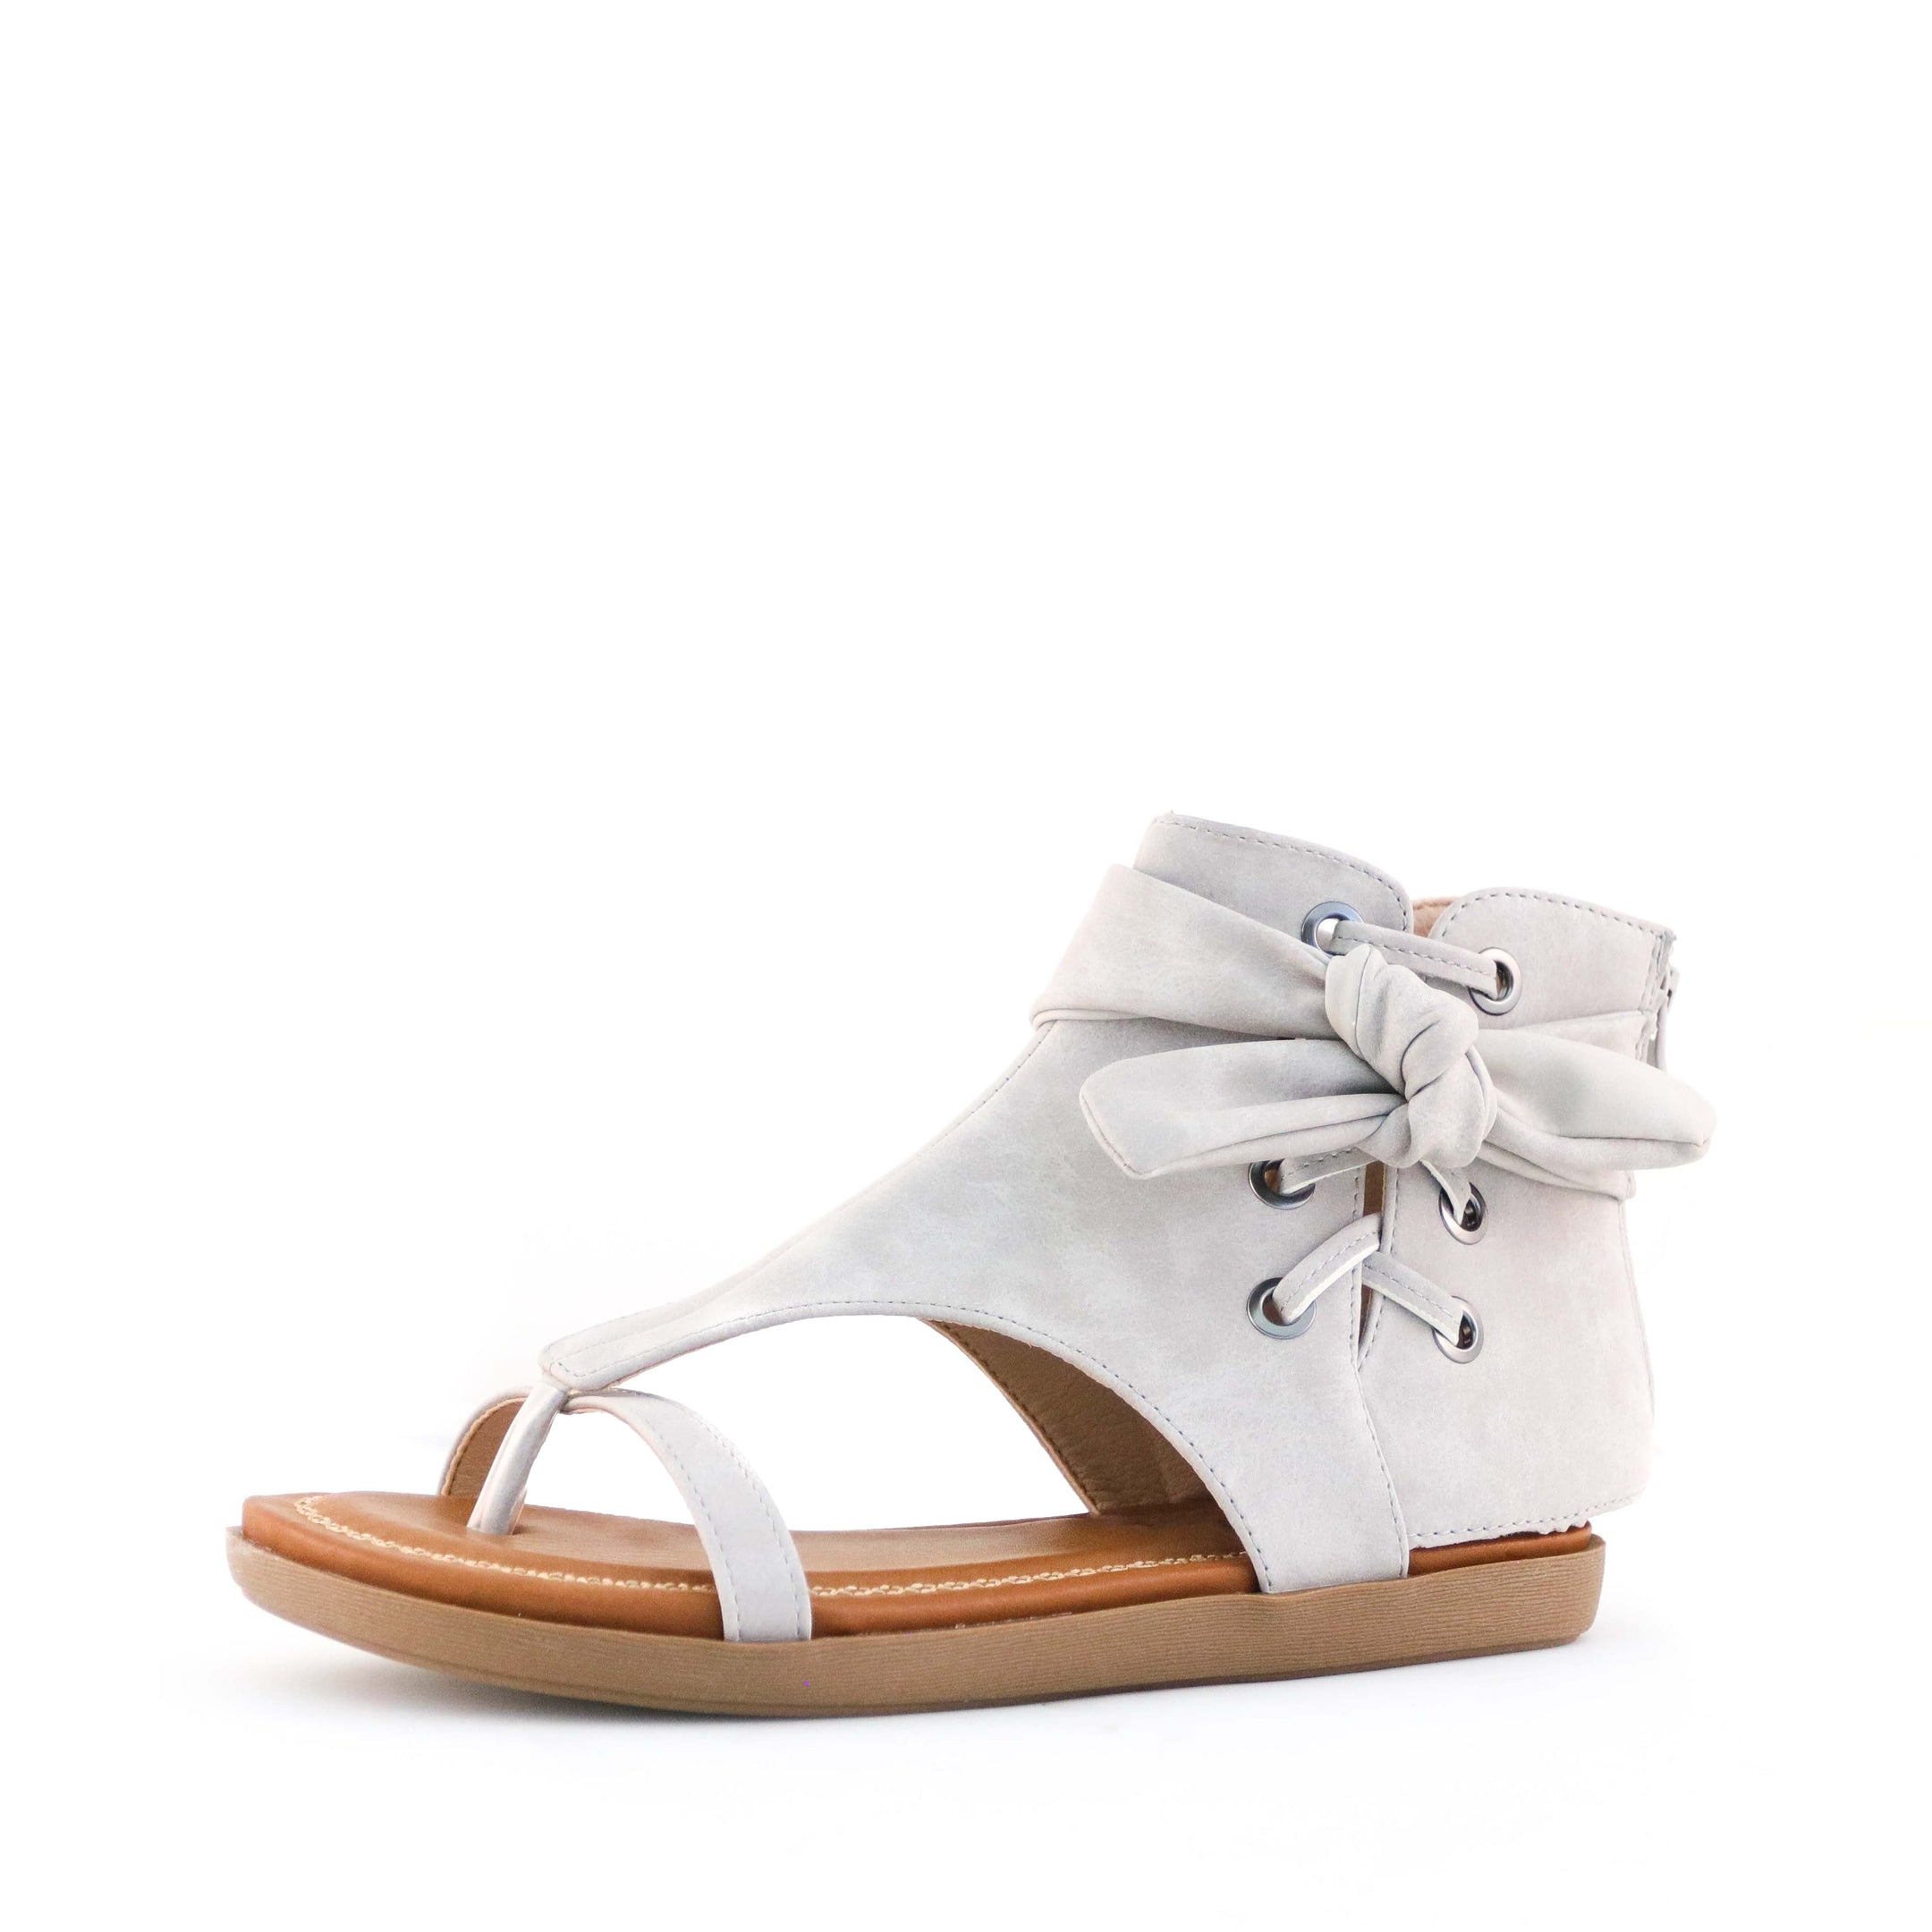 Buy Women's Chi Lace Detail Gladiator Sandal Stone by Nest Shoes